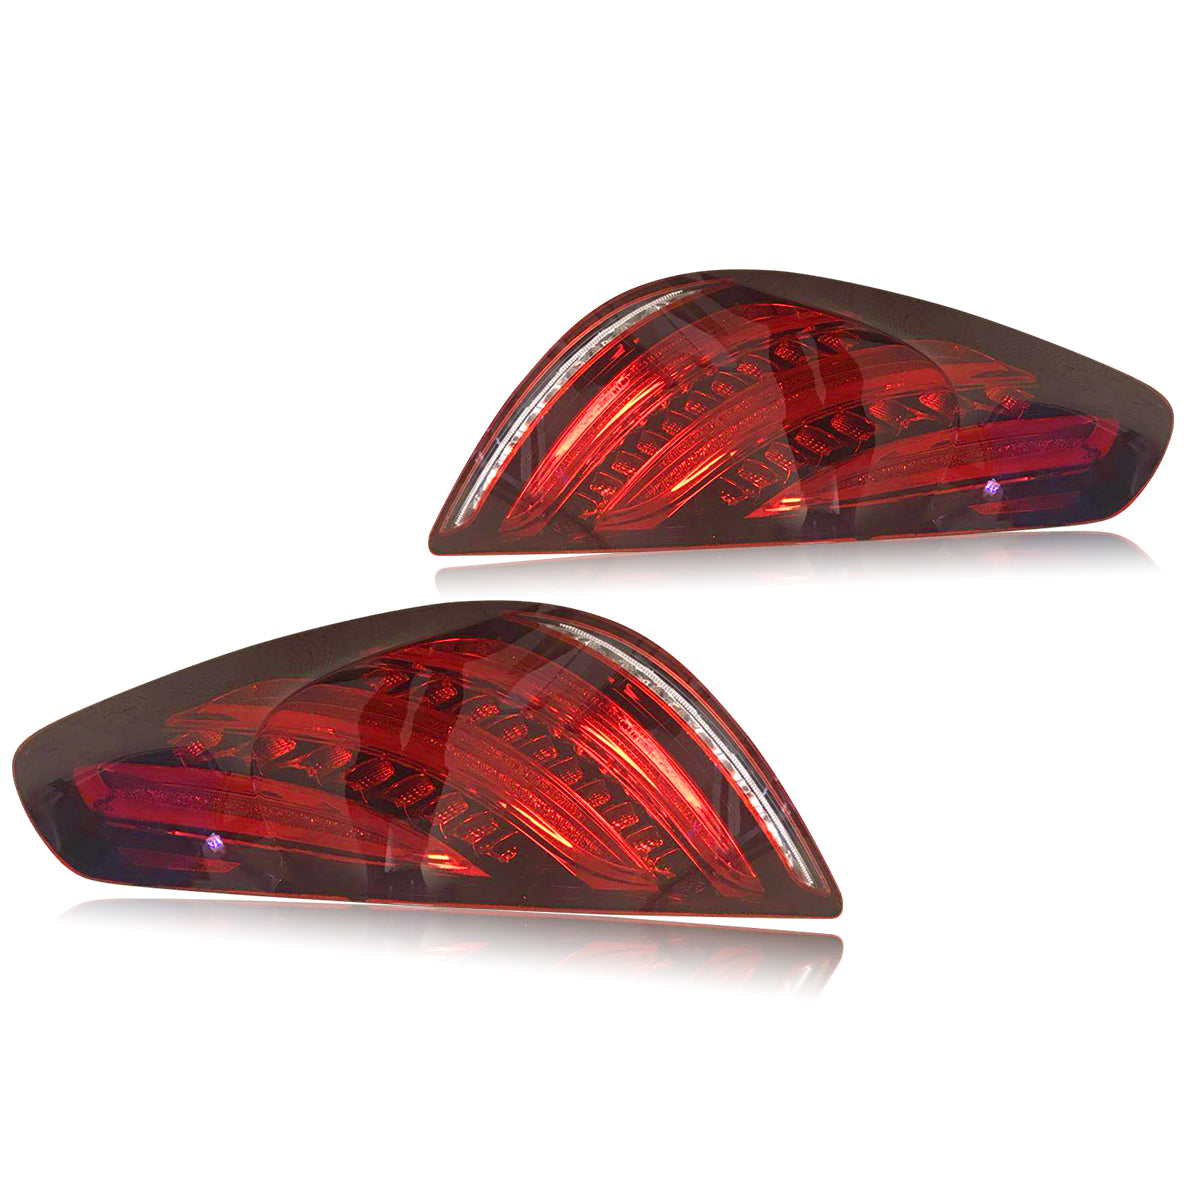 The taillight for W222 2018